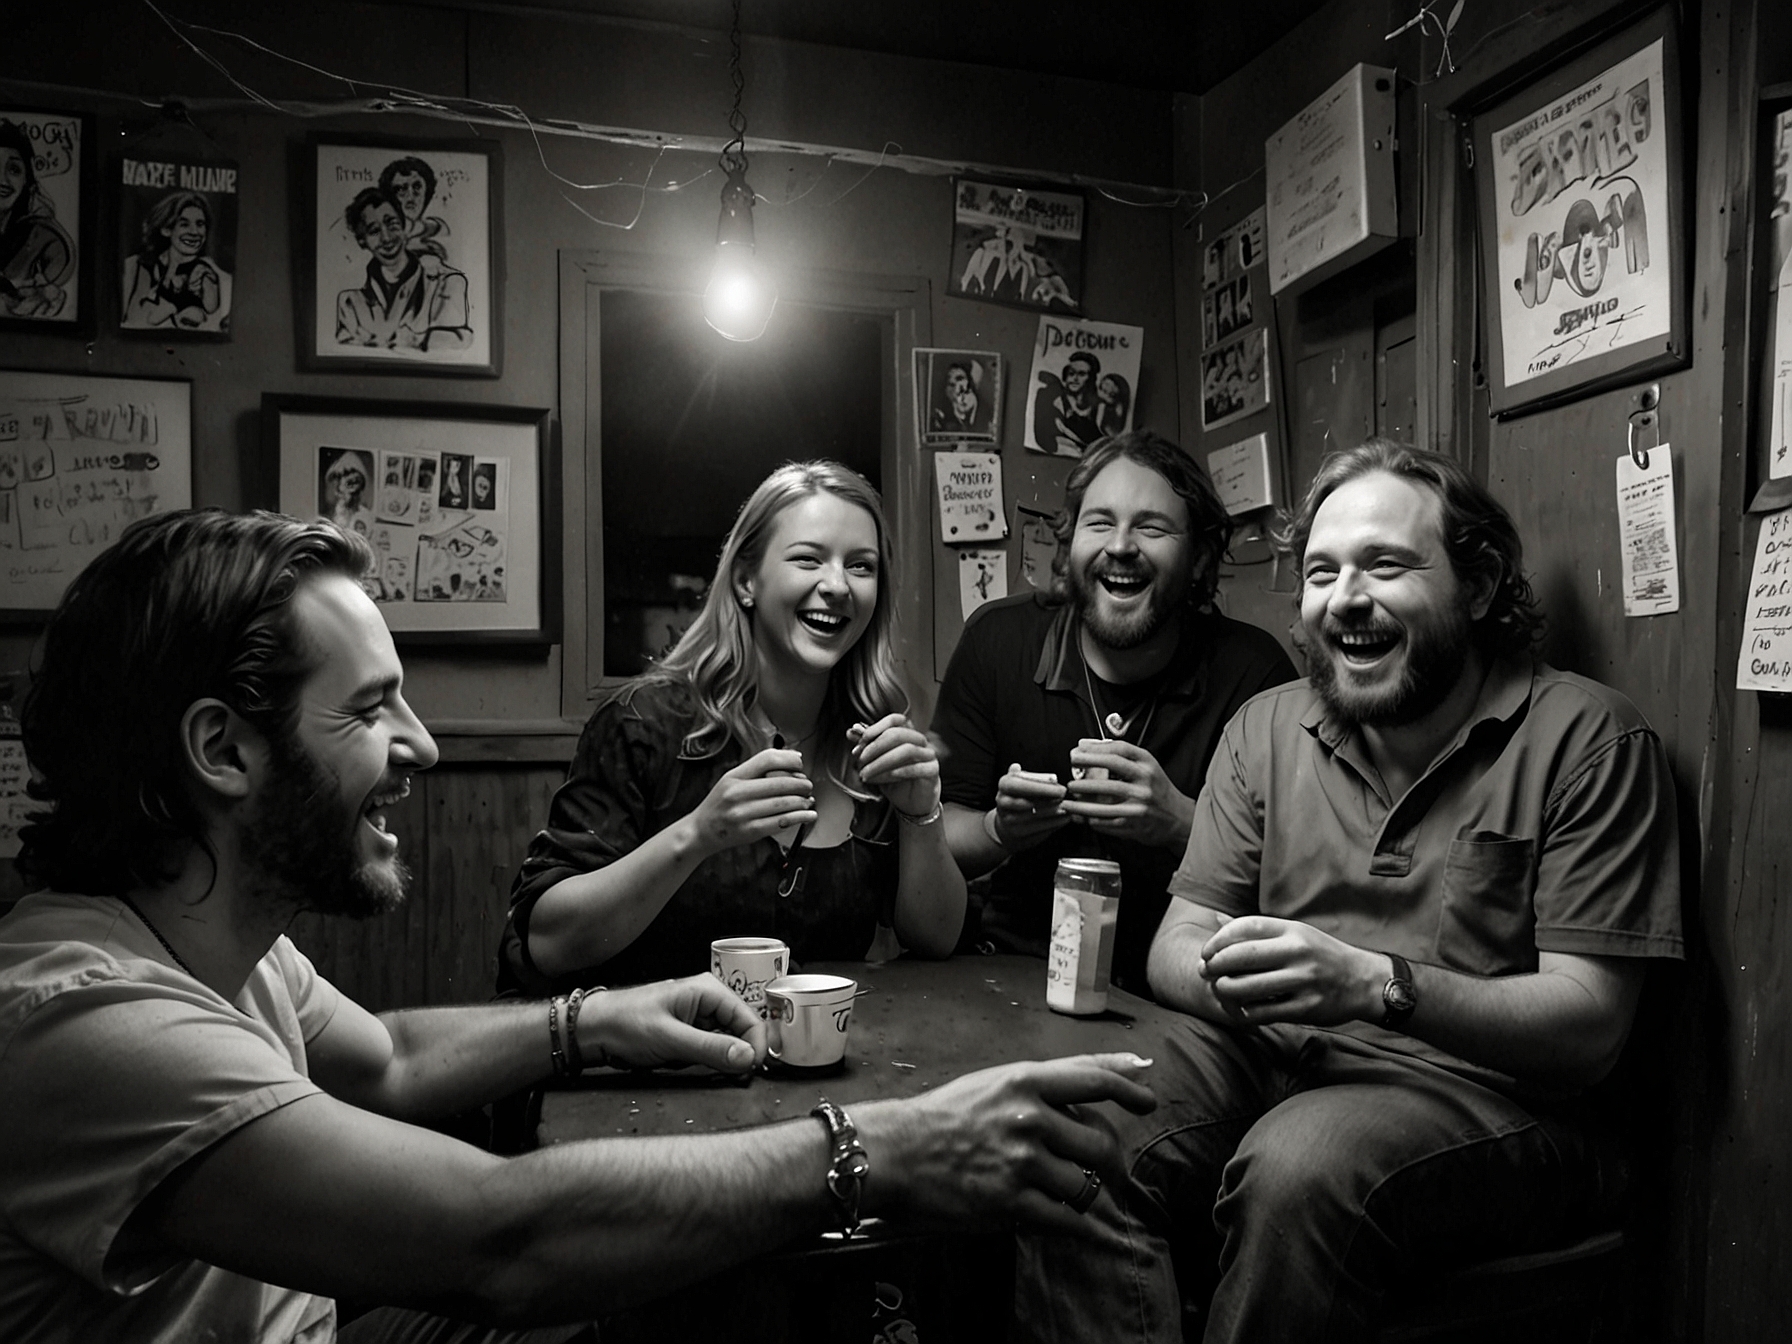 Members of Tripping Daisy in a candid backstage moment at Deep Ellum, laughing and reminiscing, showcasing their enduring friendship and passion for music.